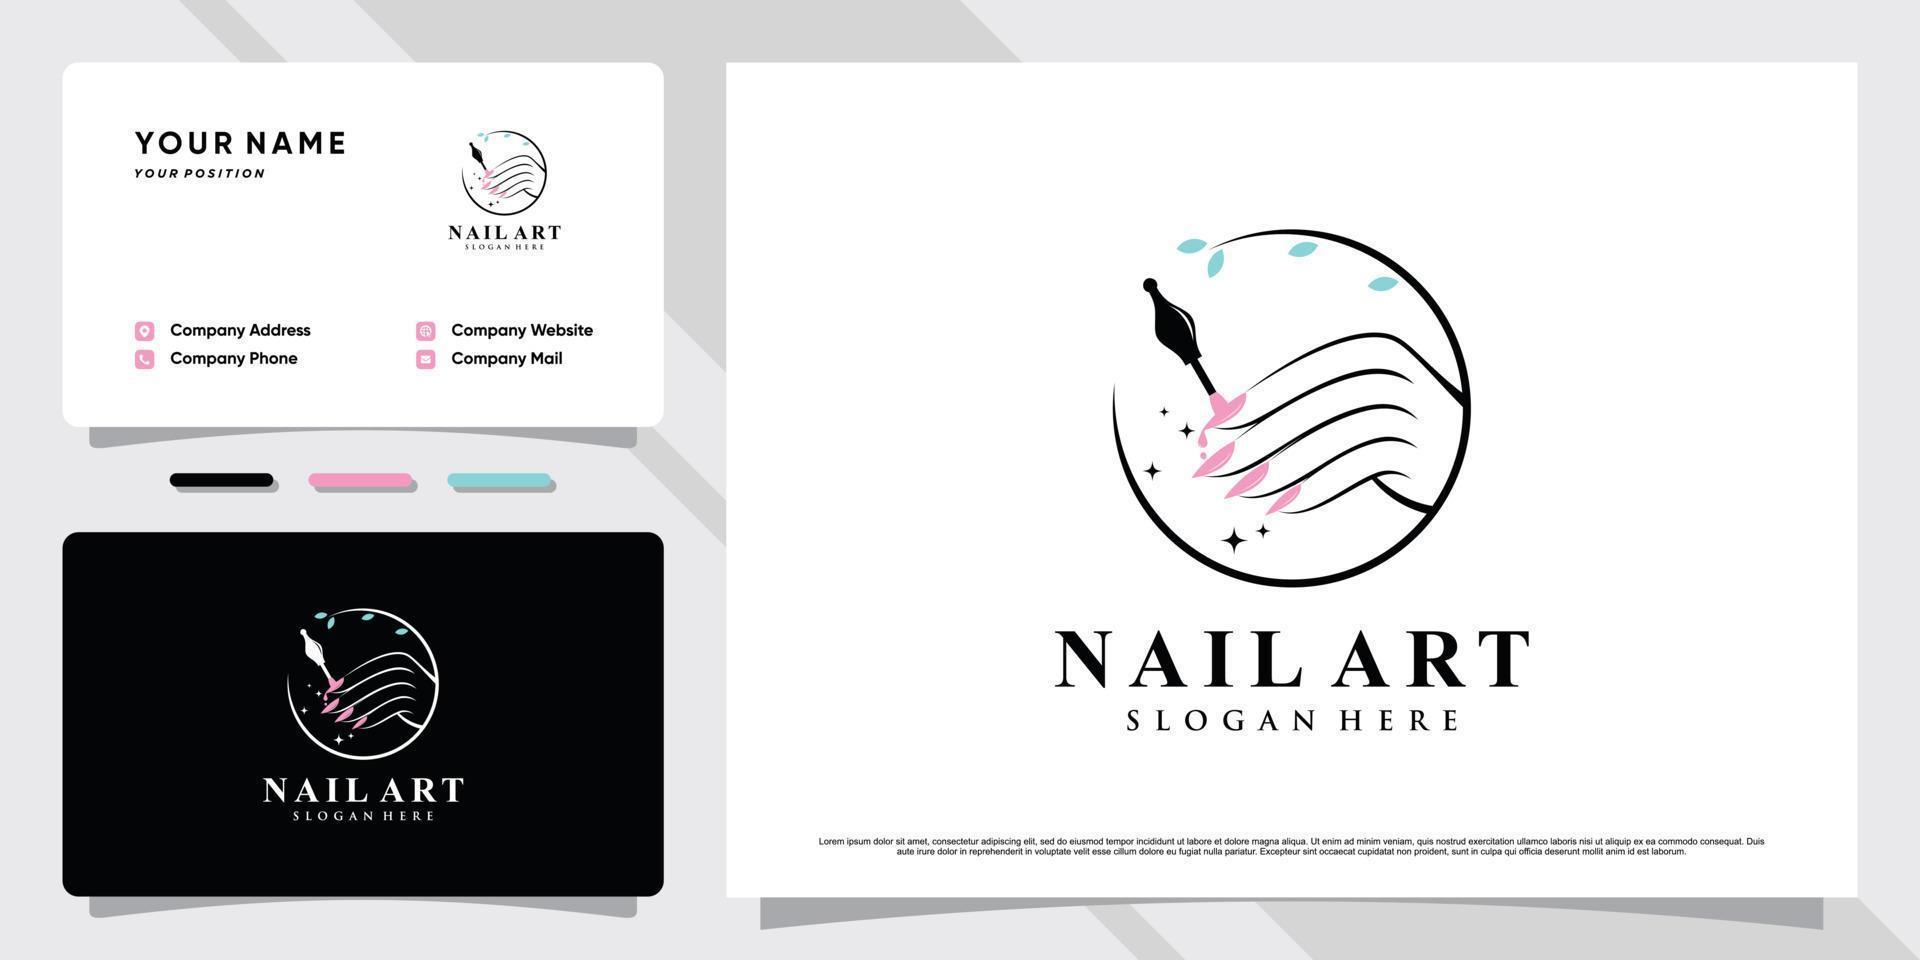 Nail art logo with creative element and business card design Premium Vector